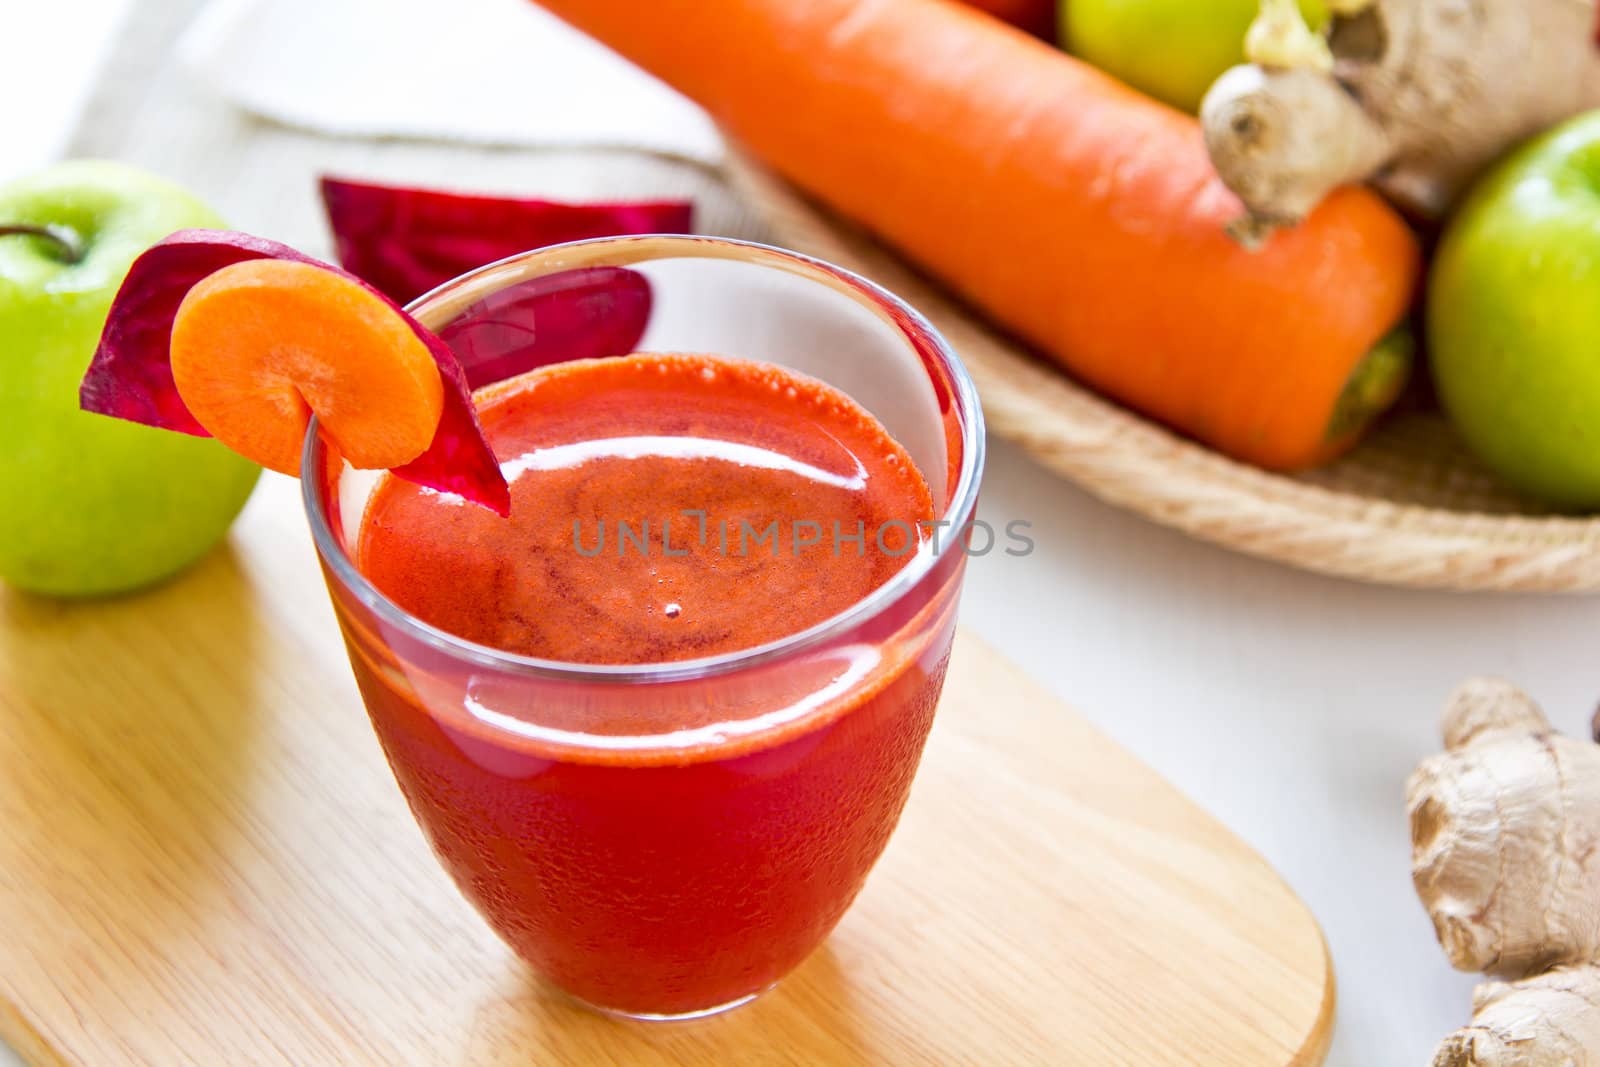 Beetroot with Carrot and apple juice by vanillaechoes